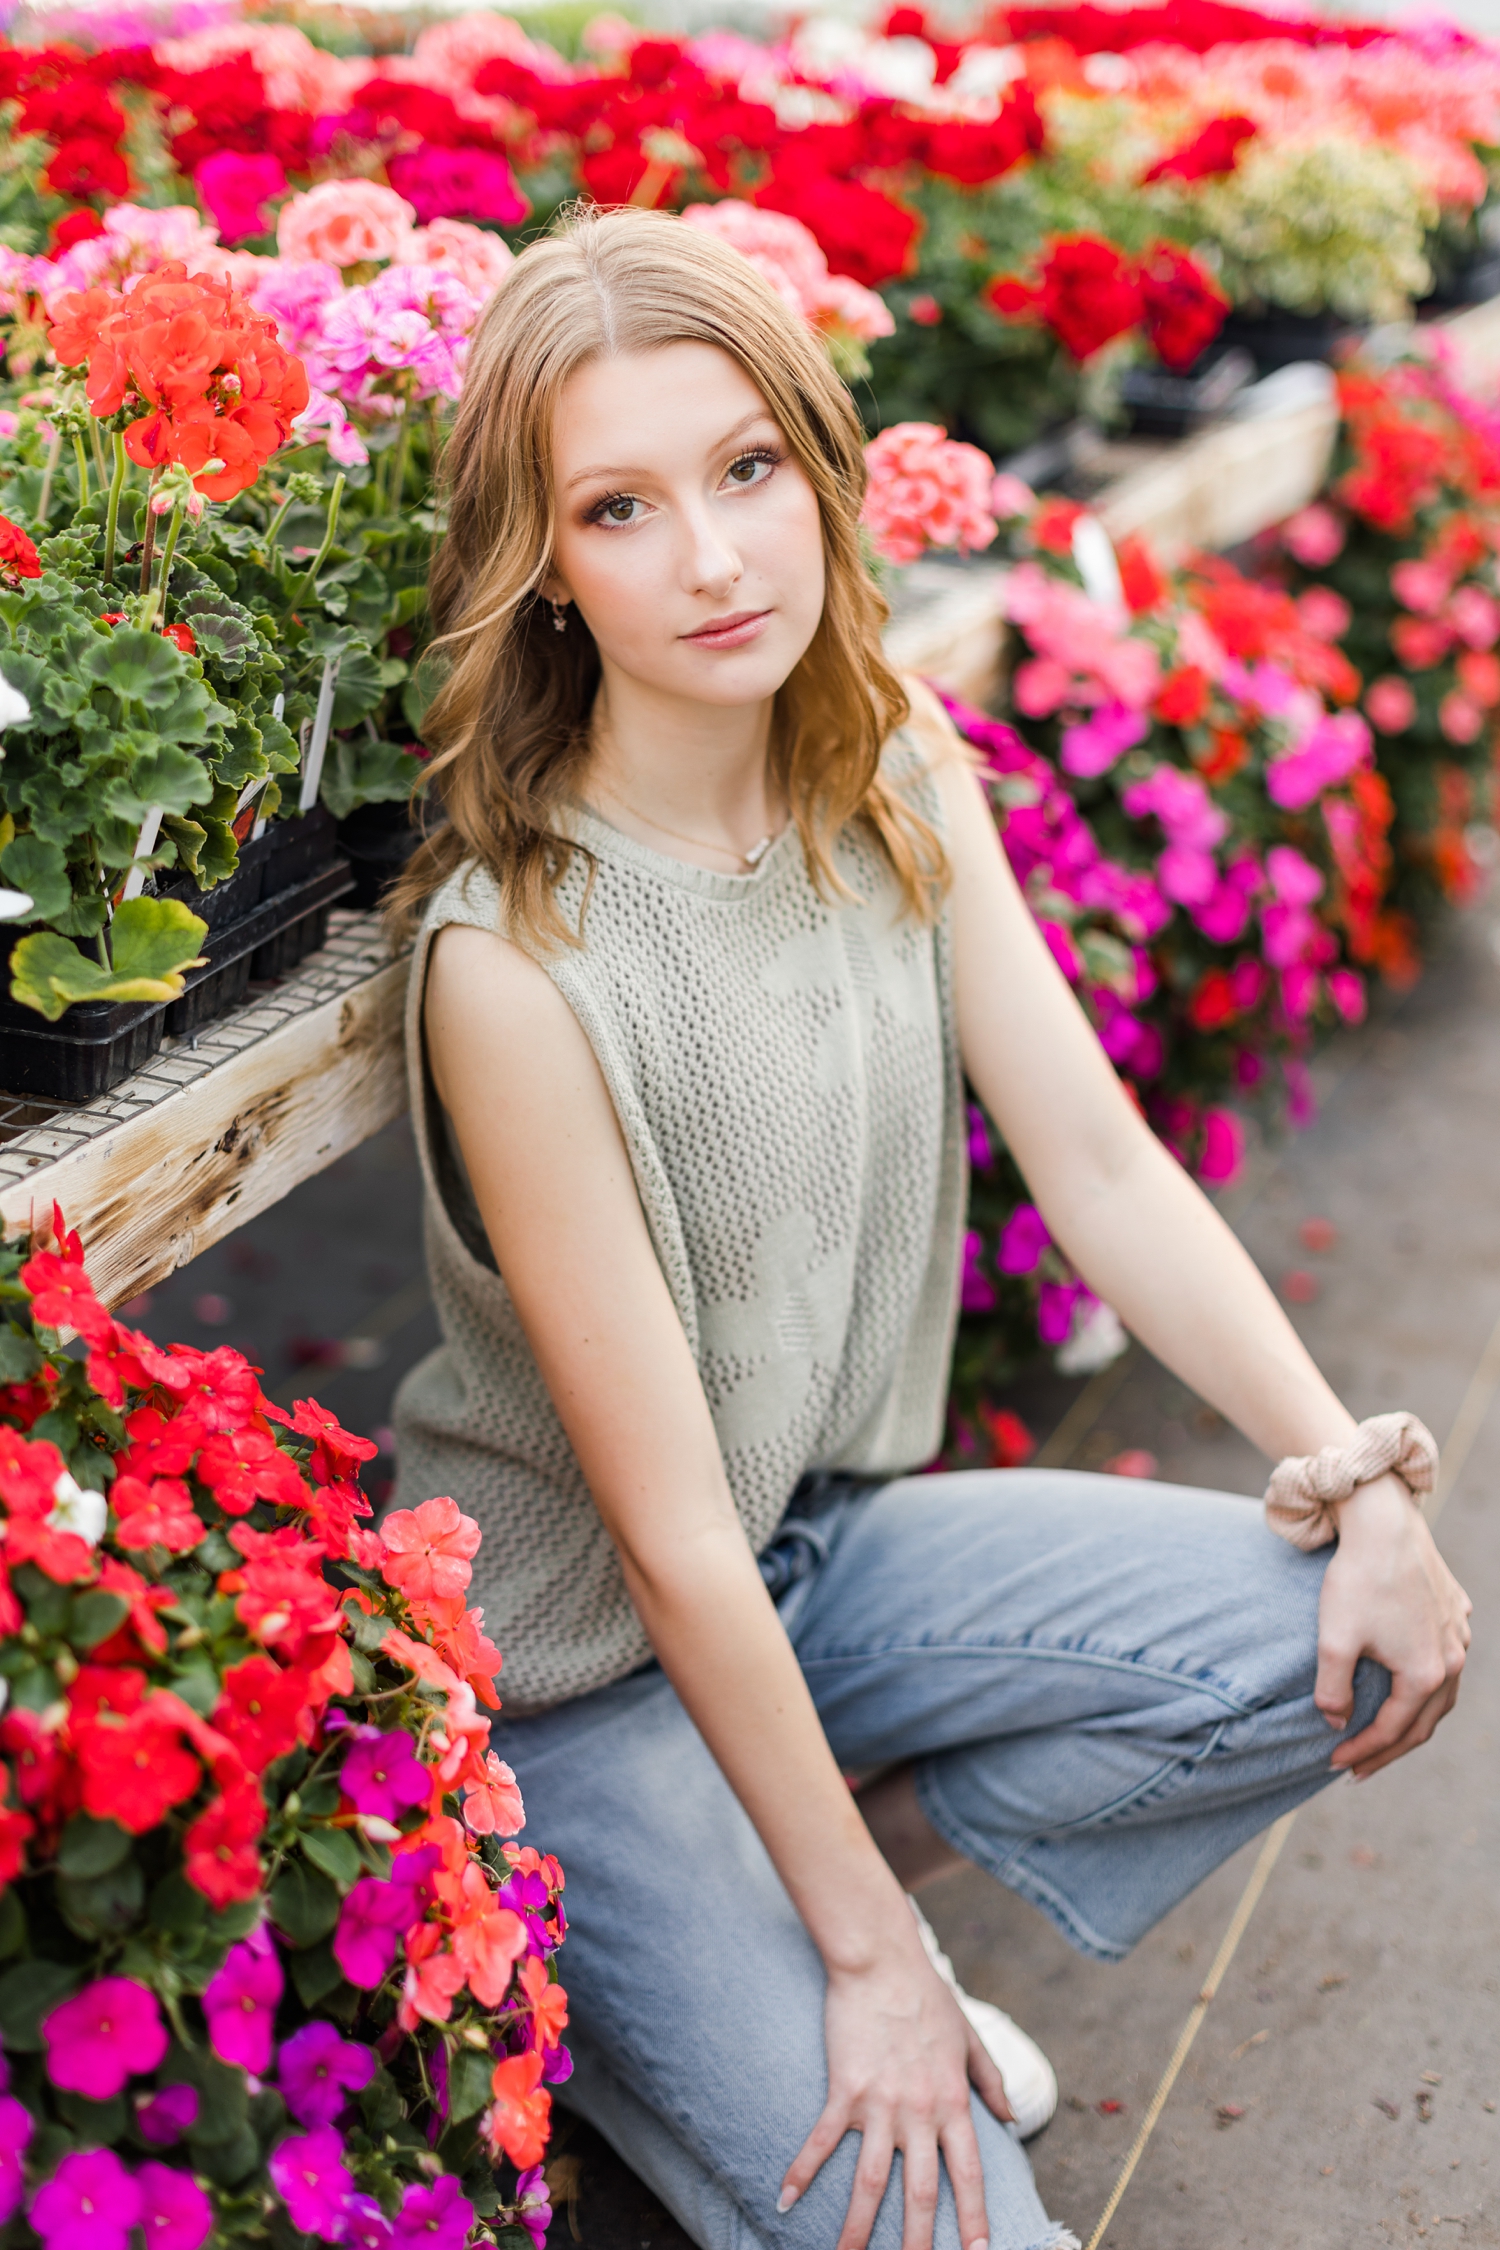 Senior spokesmodel Ryley sits surrounded by red, pink and magenta impatiens and geraniums in a greenhouse photoshoot | CB Studio